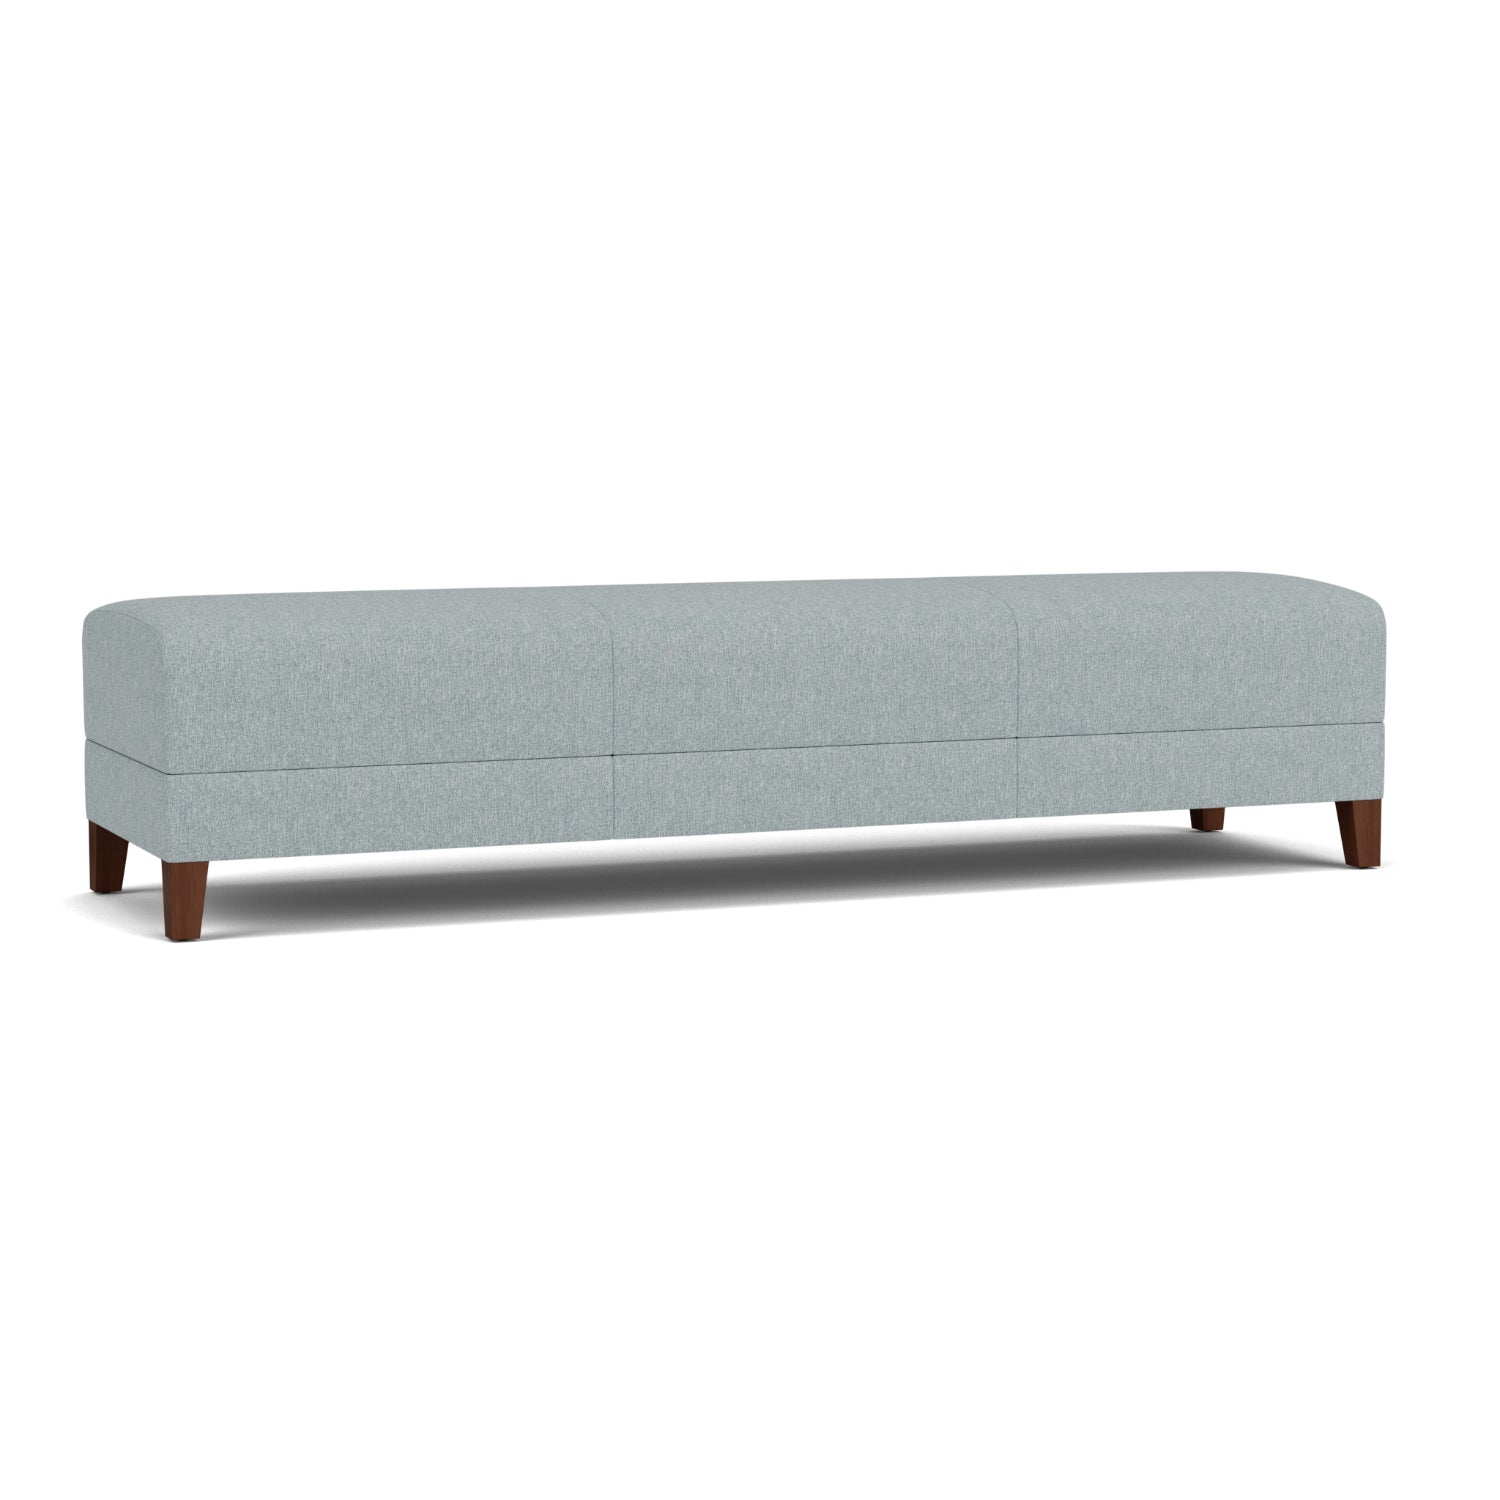 Fremont Collection Reception Seating, 3 Seat Bench, Healthcare Vinyl Upholstery, FREE SHIPPING